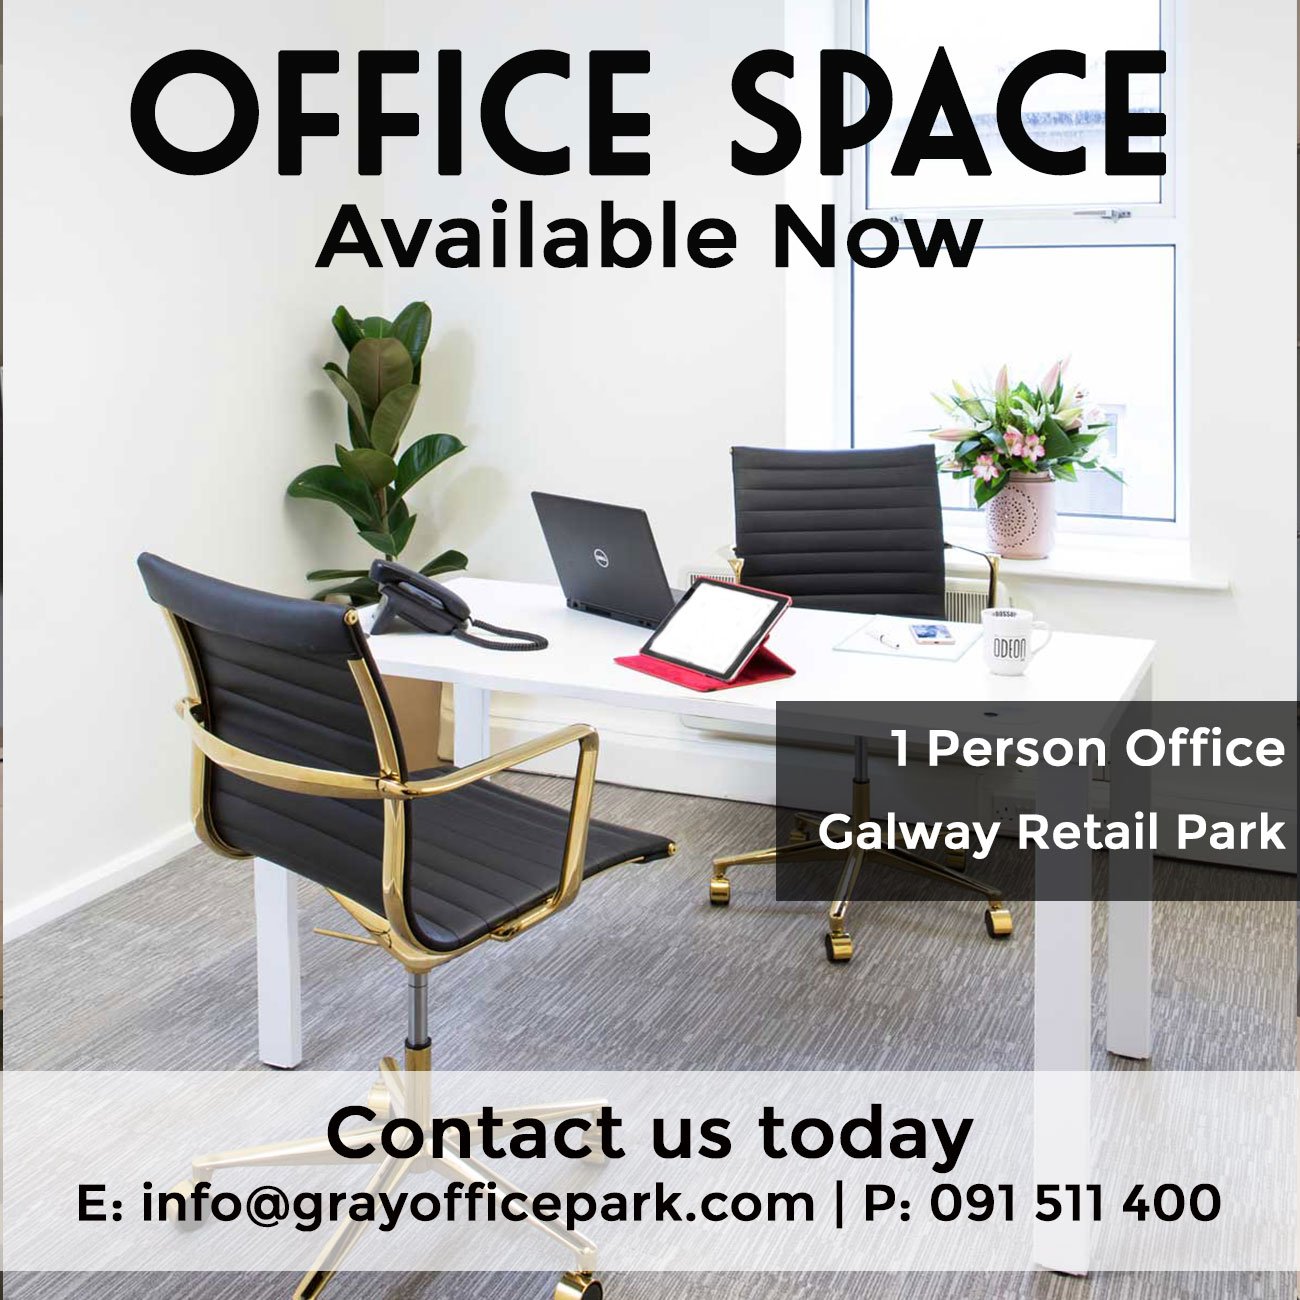 OFFICE-SPACE